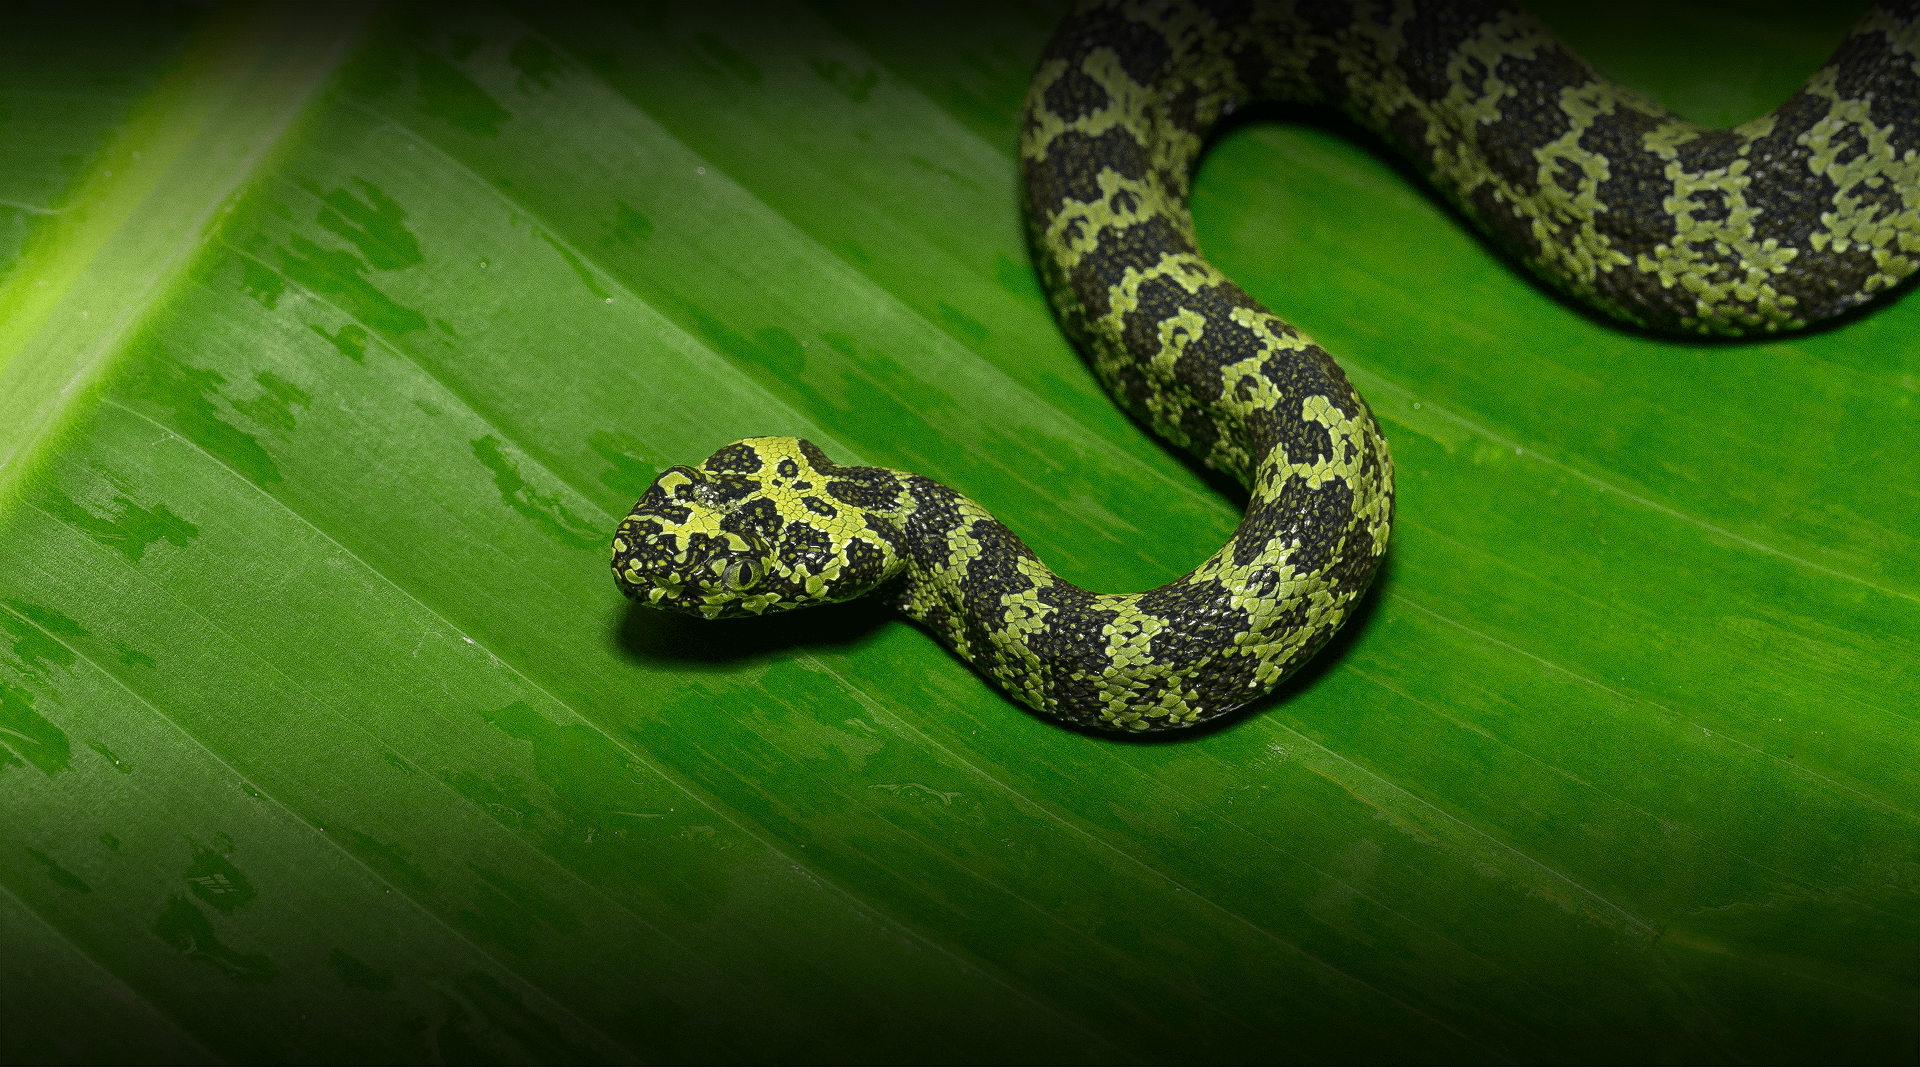 Mang Mountain Viper slithers on a leaf